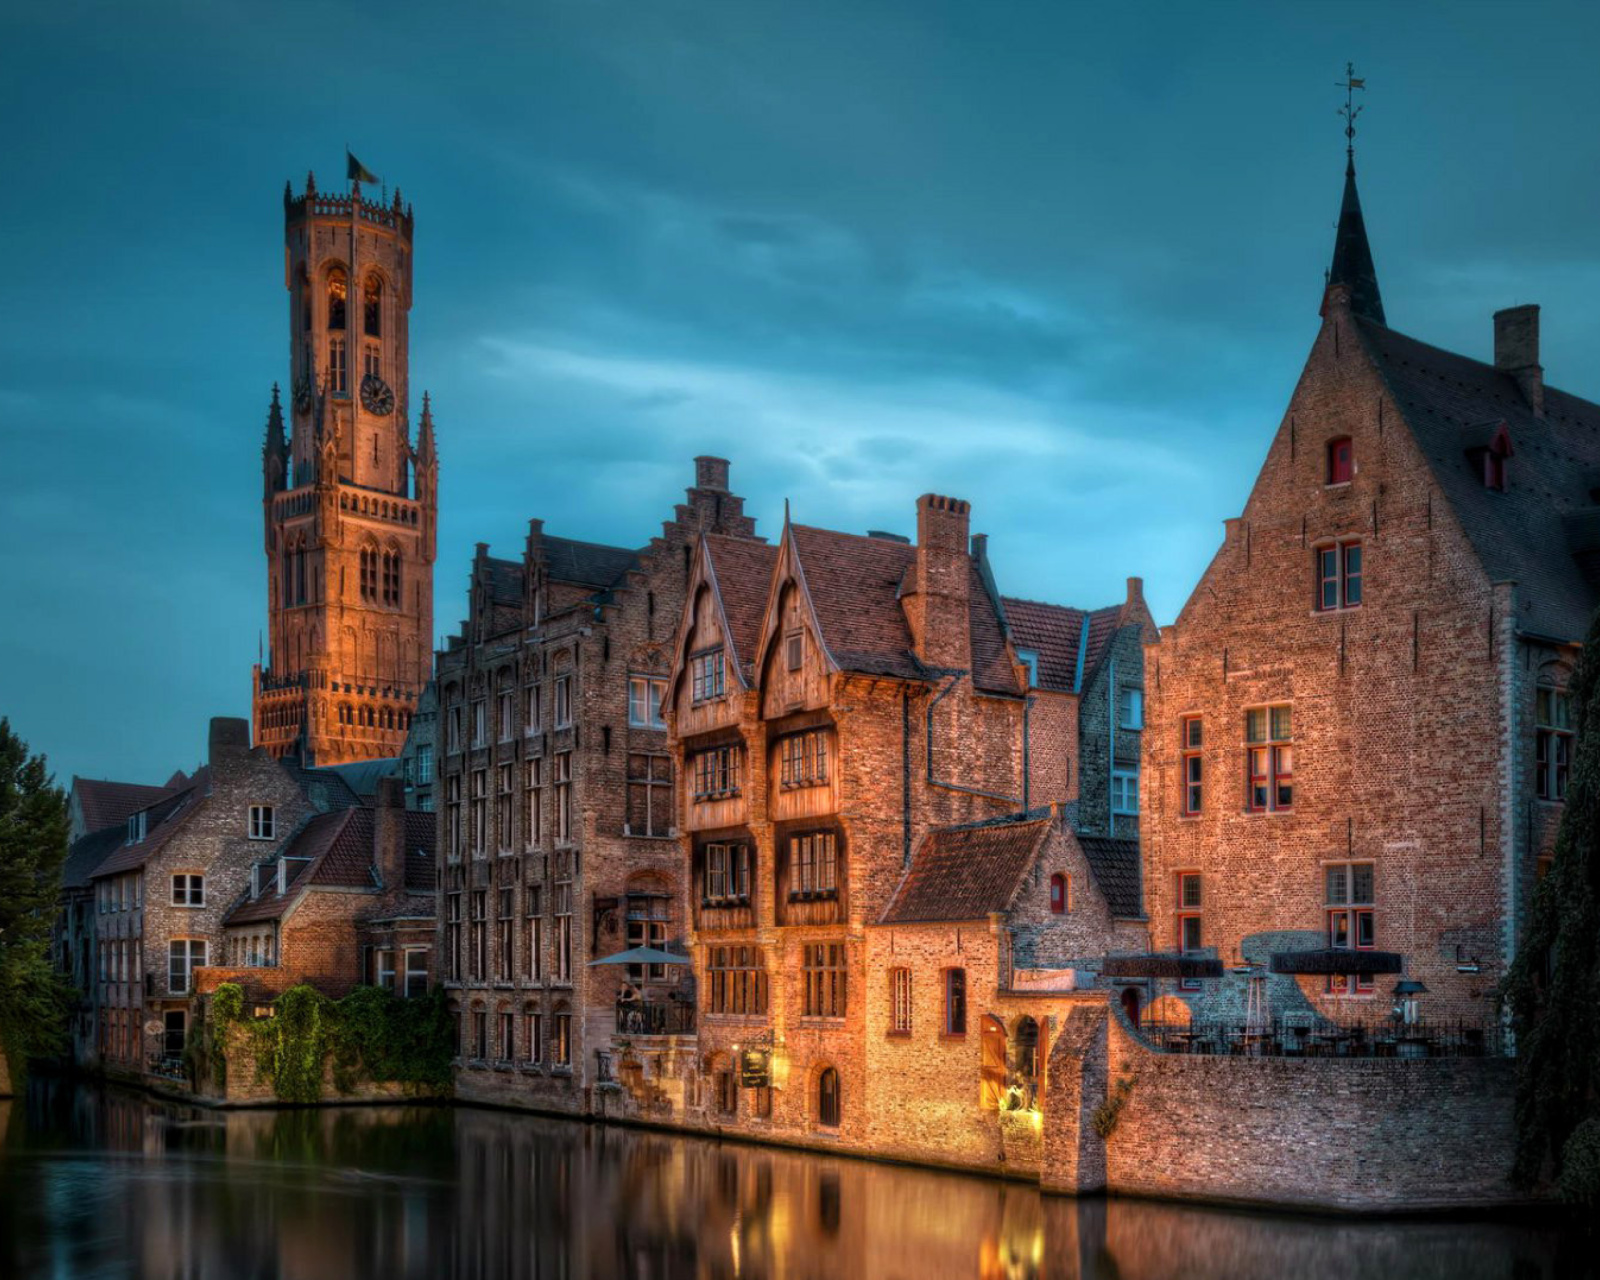 Bruges city on canal screenshot #1 1600x1280